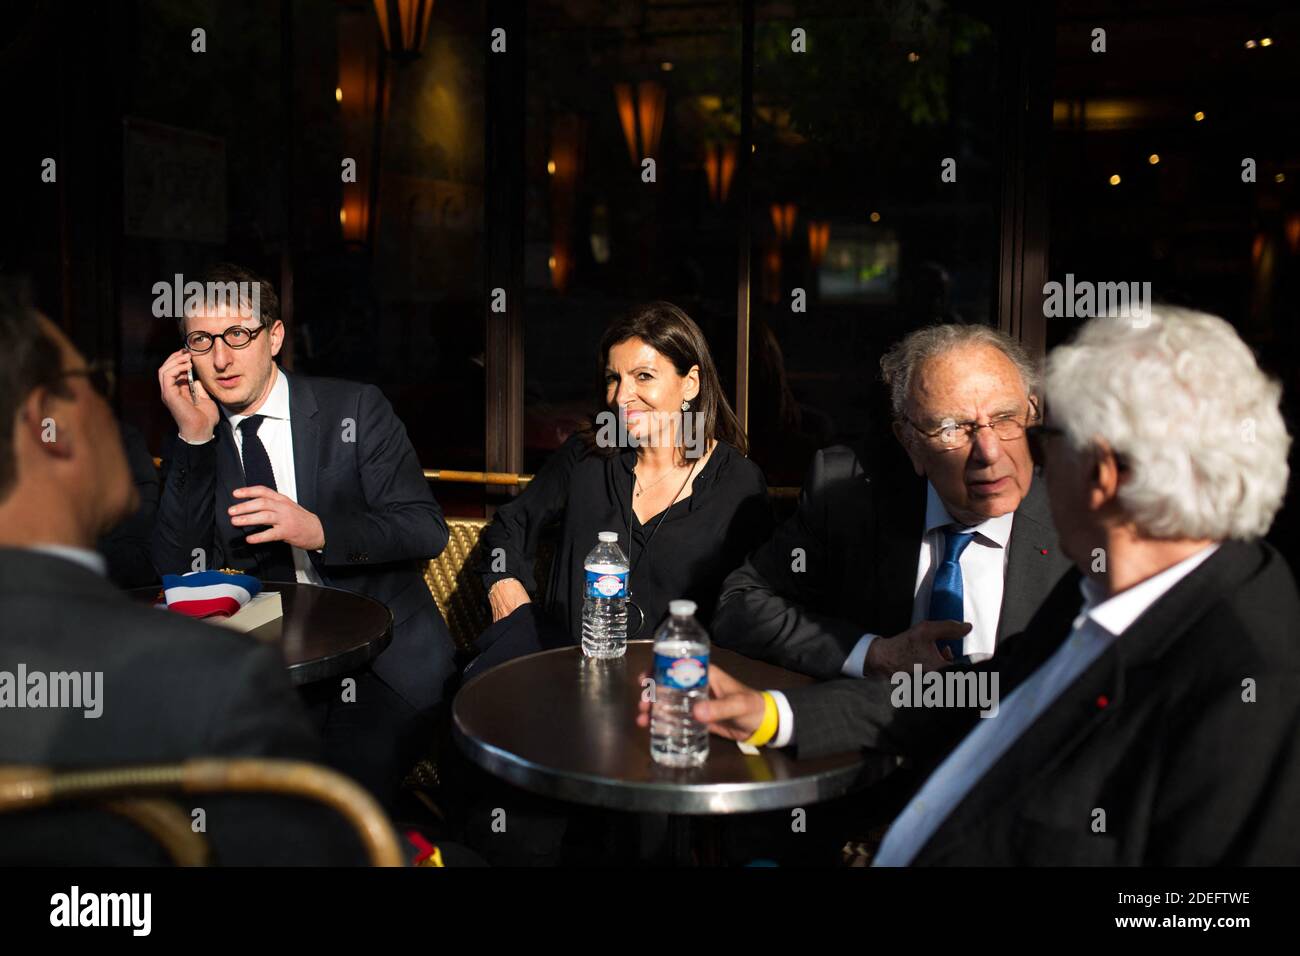 Anne Hidalgo stop to have a drink in a bar front of Notre Dame cathedral on April 18, 2019 in Paris. France paid a daylong tribute on April 18, 2019 to the Paris firefighters who saved Notre Dame Cathedral from collapse, while construction workers rushed to secure an area above one of the church's famed rose-shaped windows and other vulnerable sections of the fire-damaged landmark. Photo by Raphael Lafargue/ABACAPRESS.COM Stock Photo